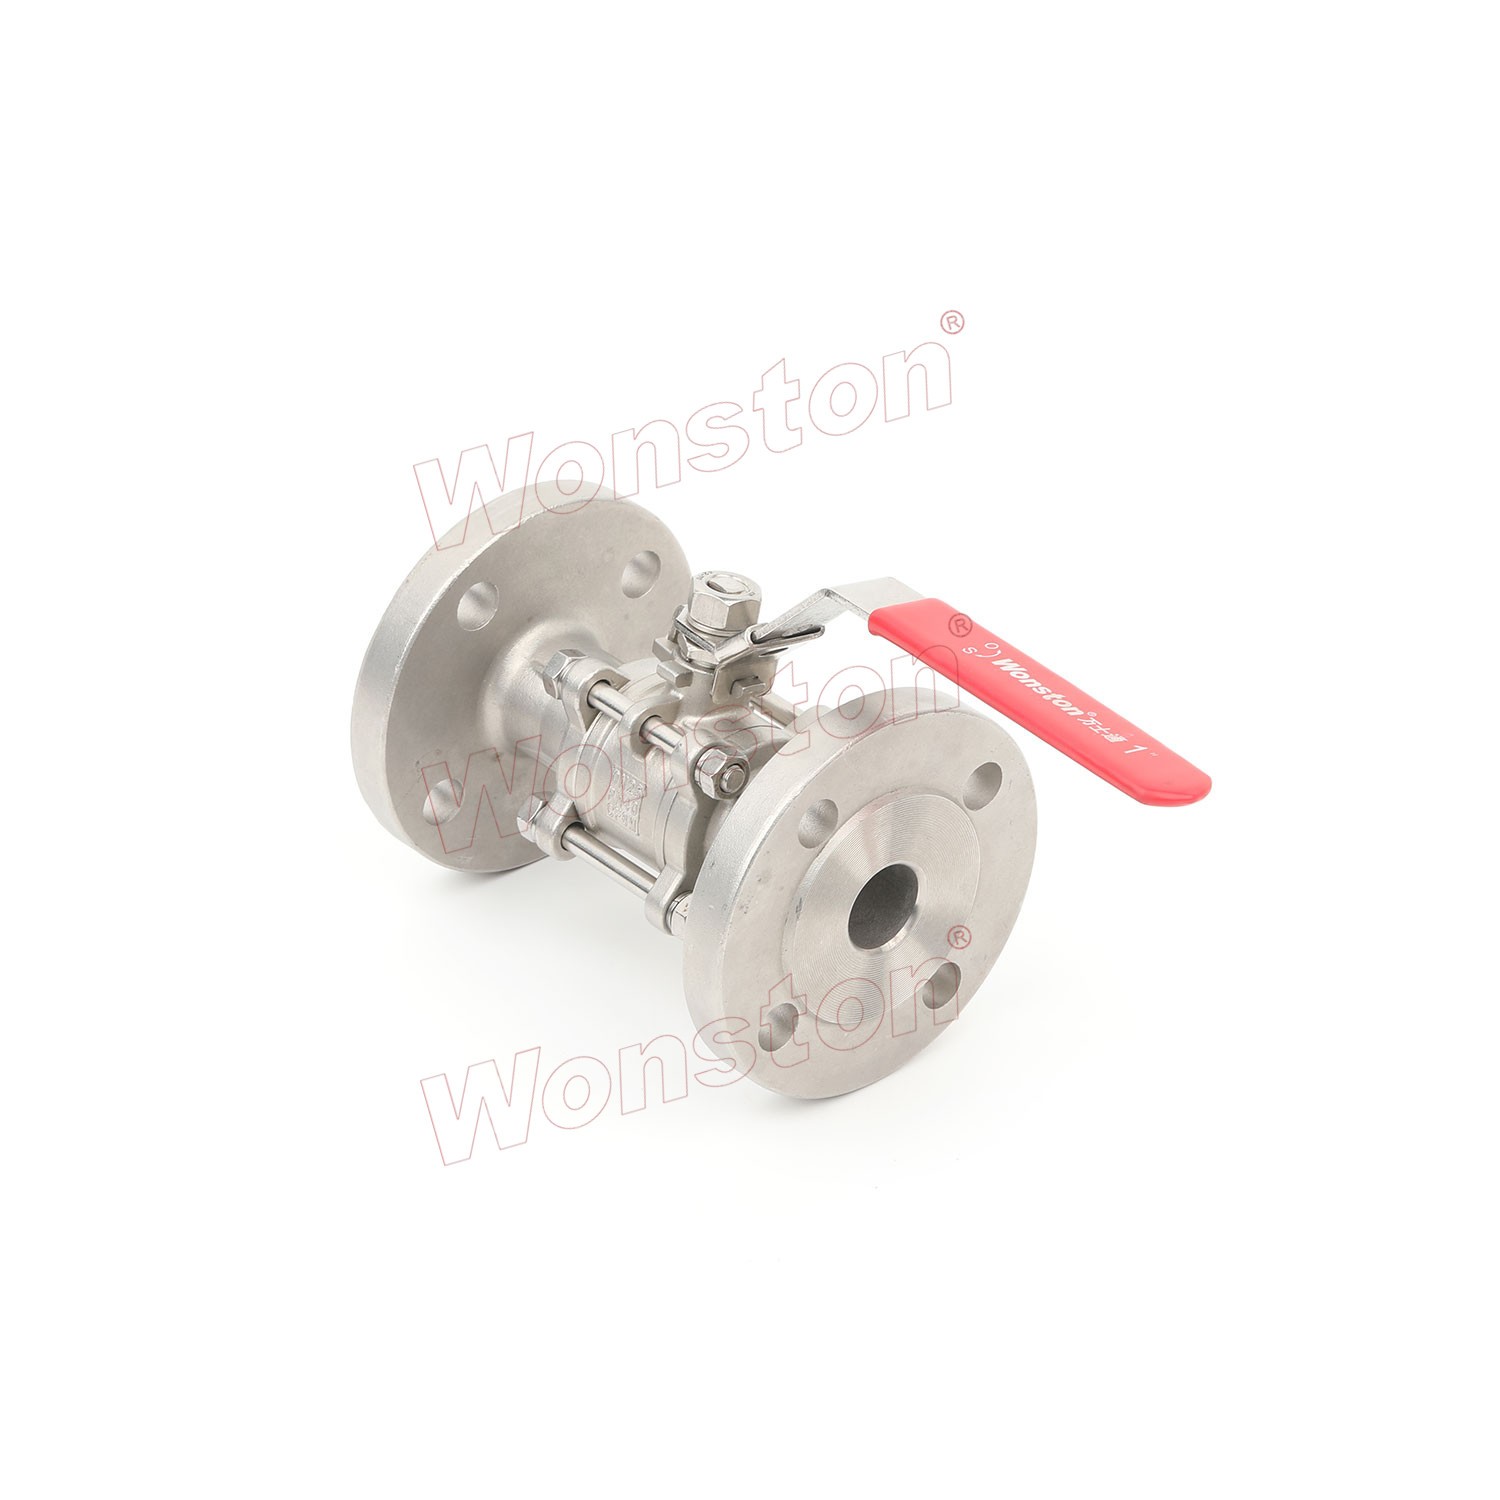 3PC Ball Valve Flanged End DIN PN16 and PN40